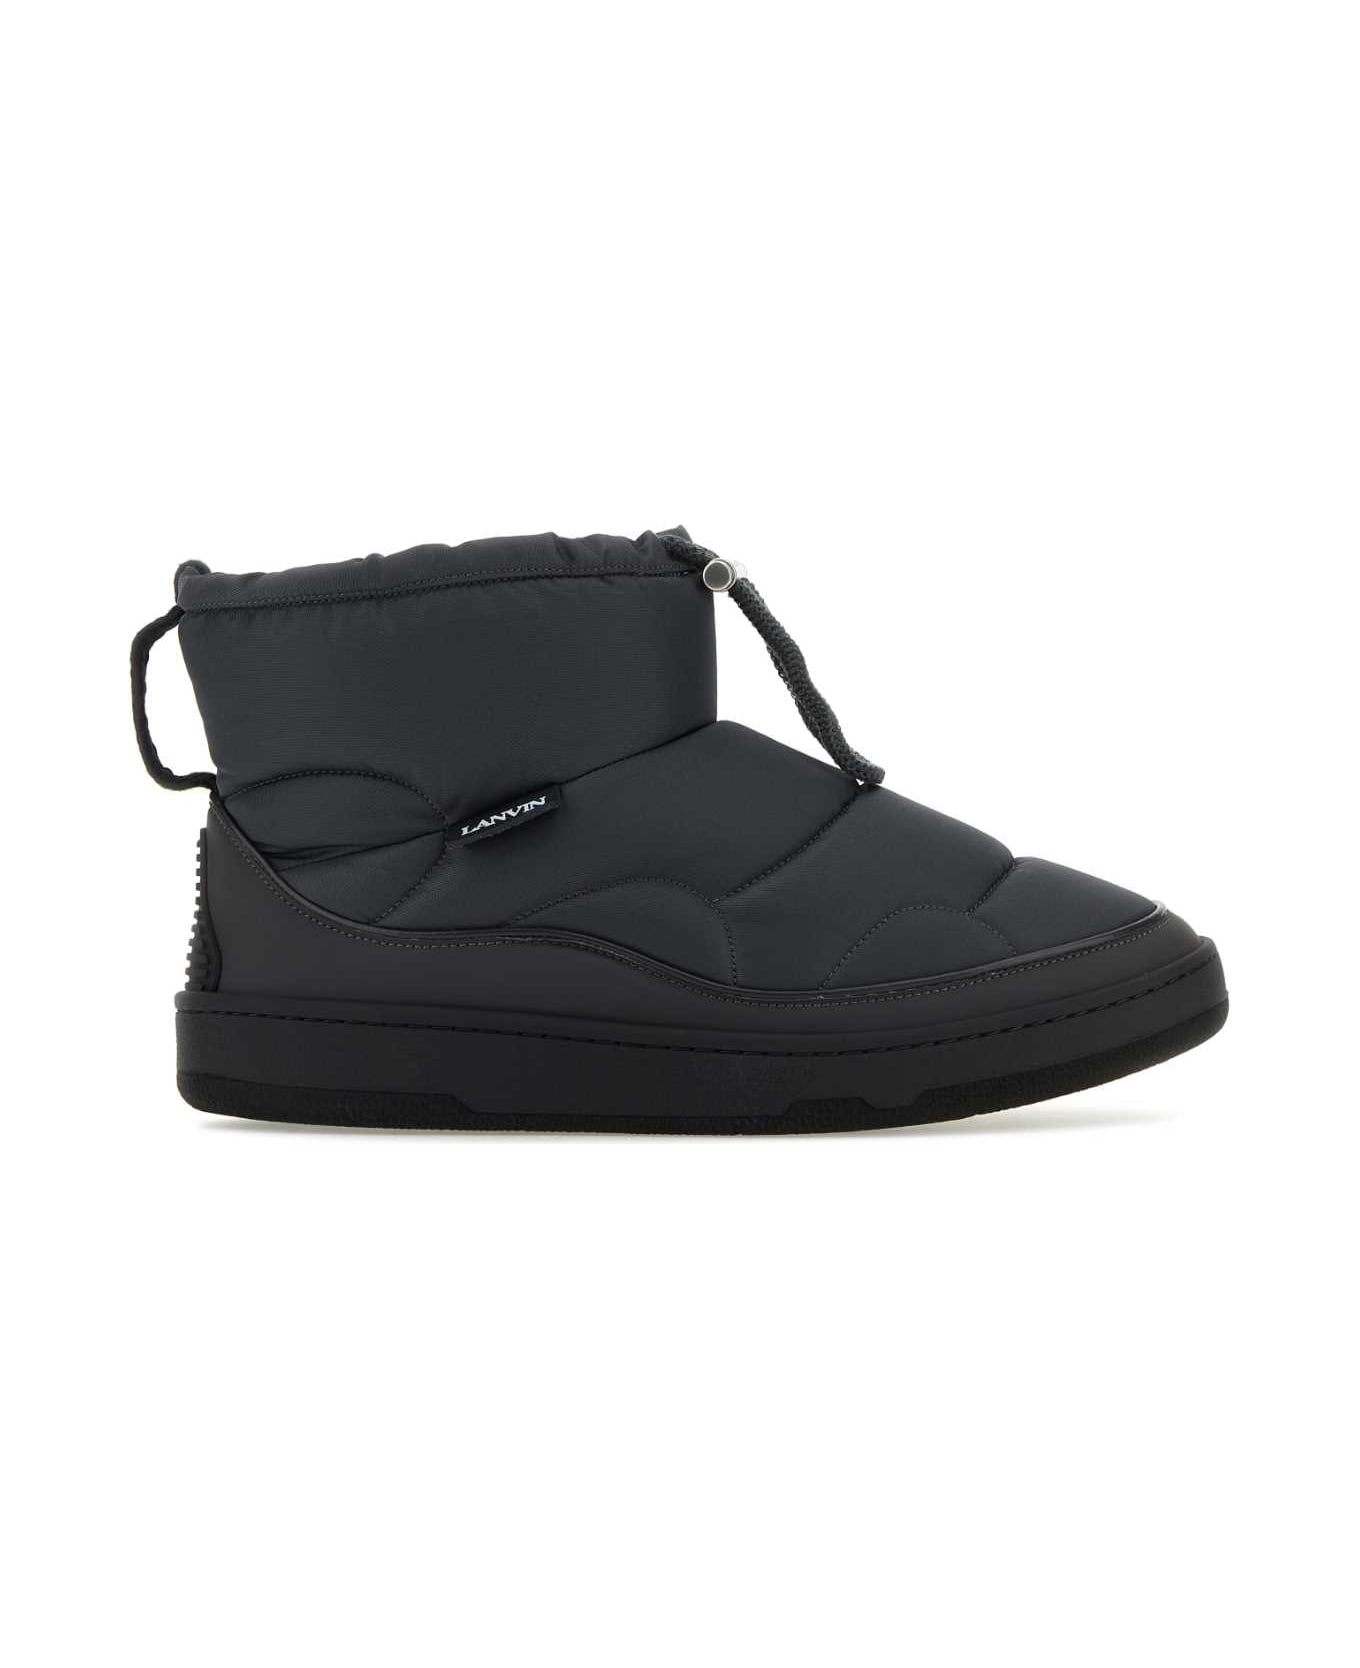 Lanvin Graphite Fabric Curb Snow Ankle Boots - LODEN ブーツ